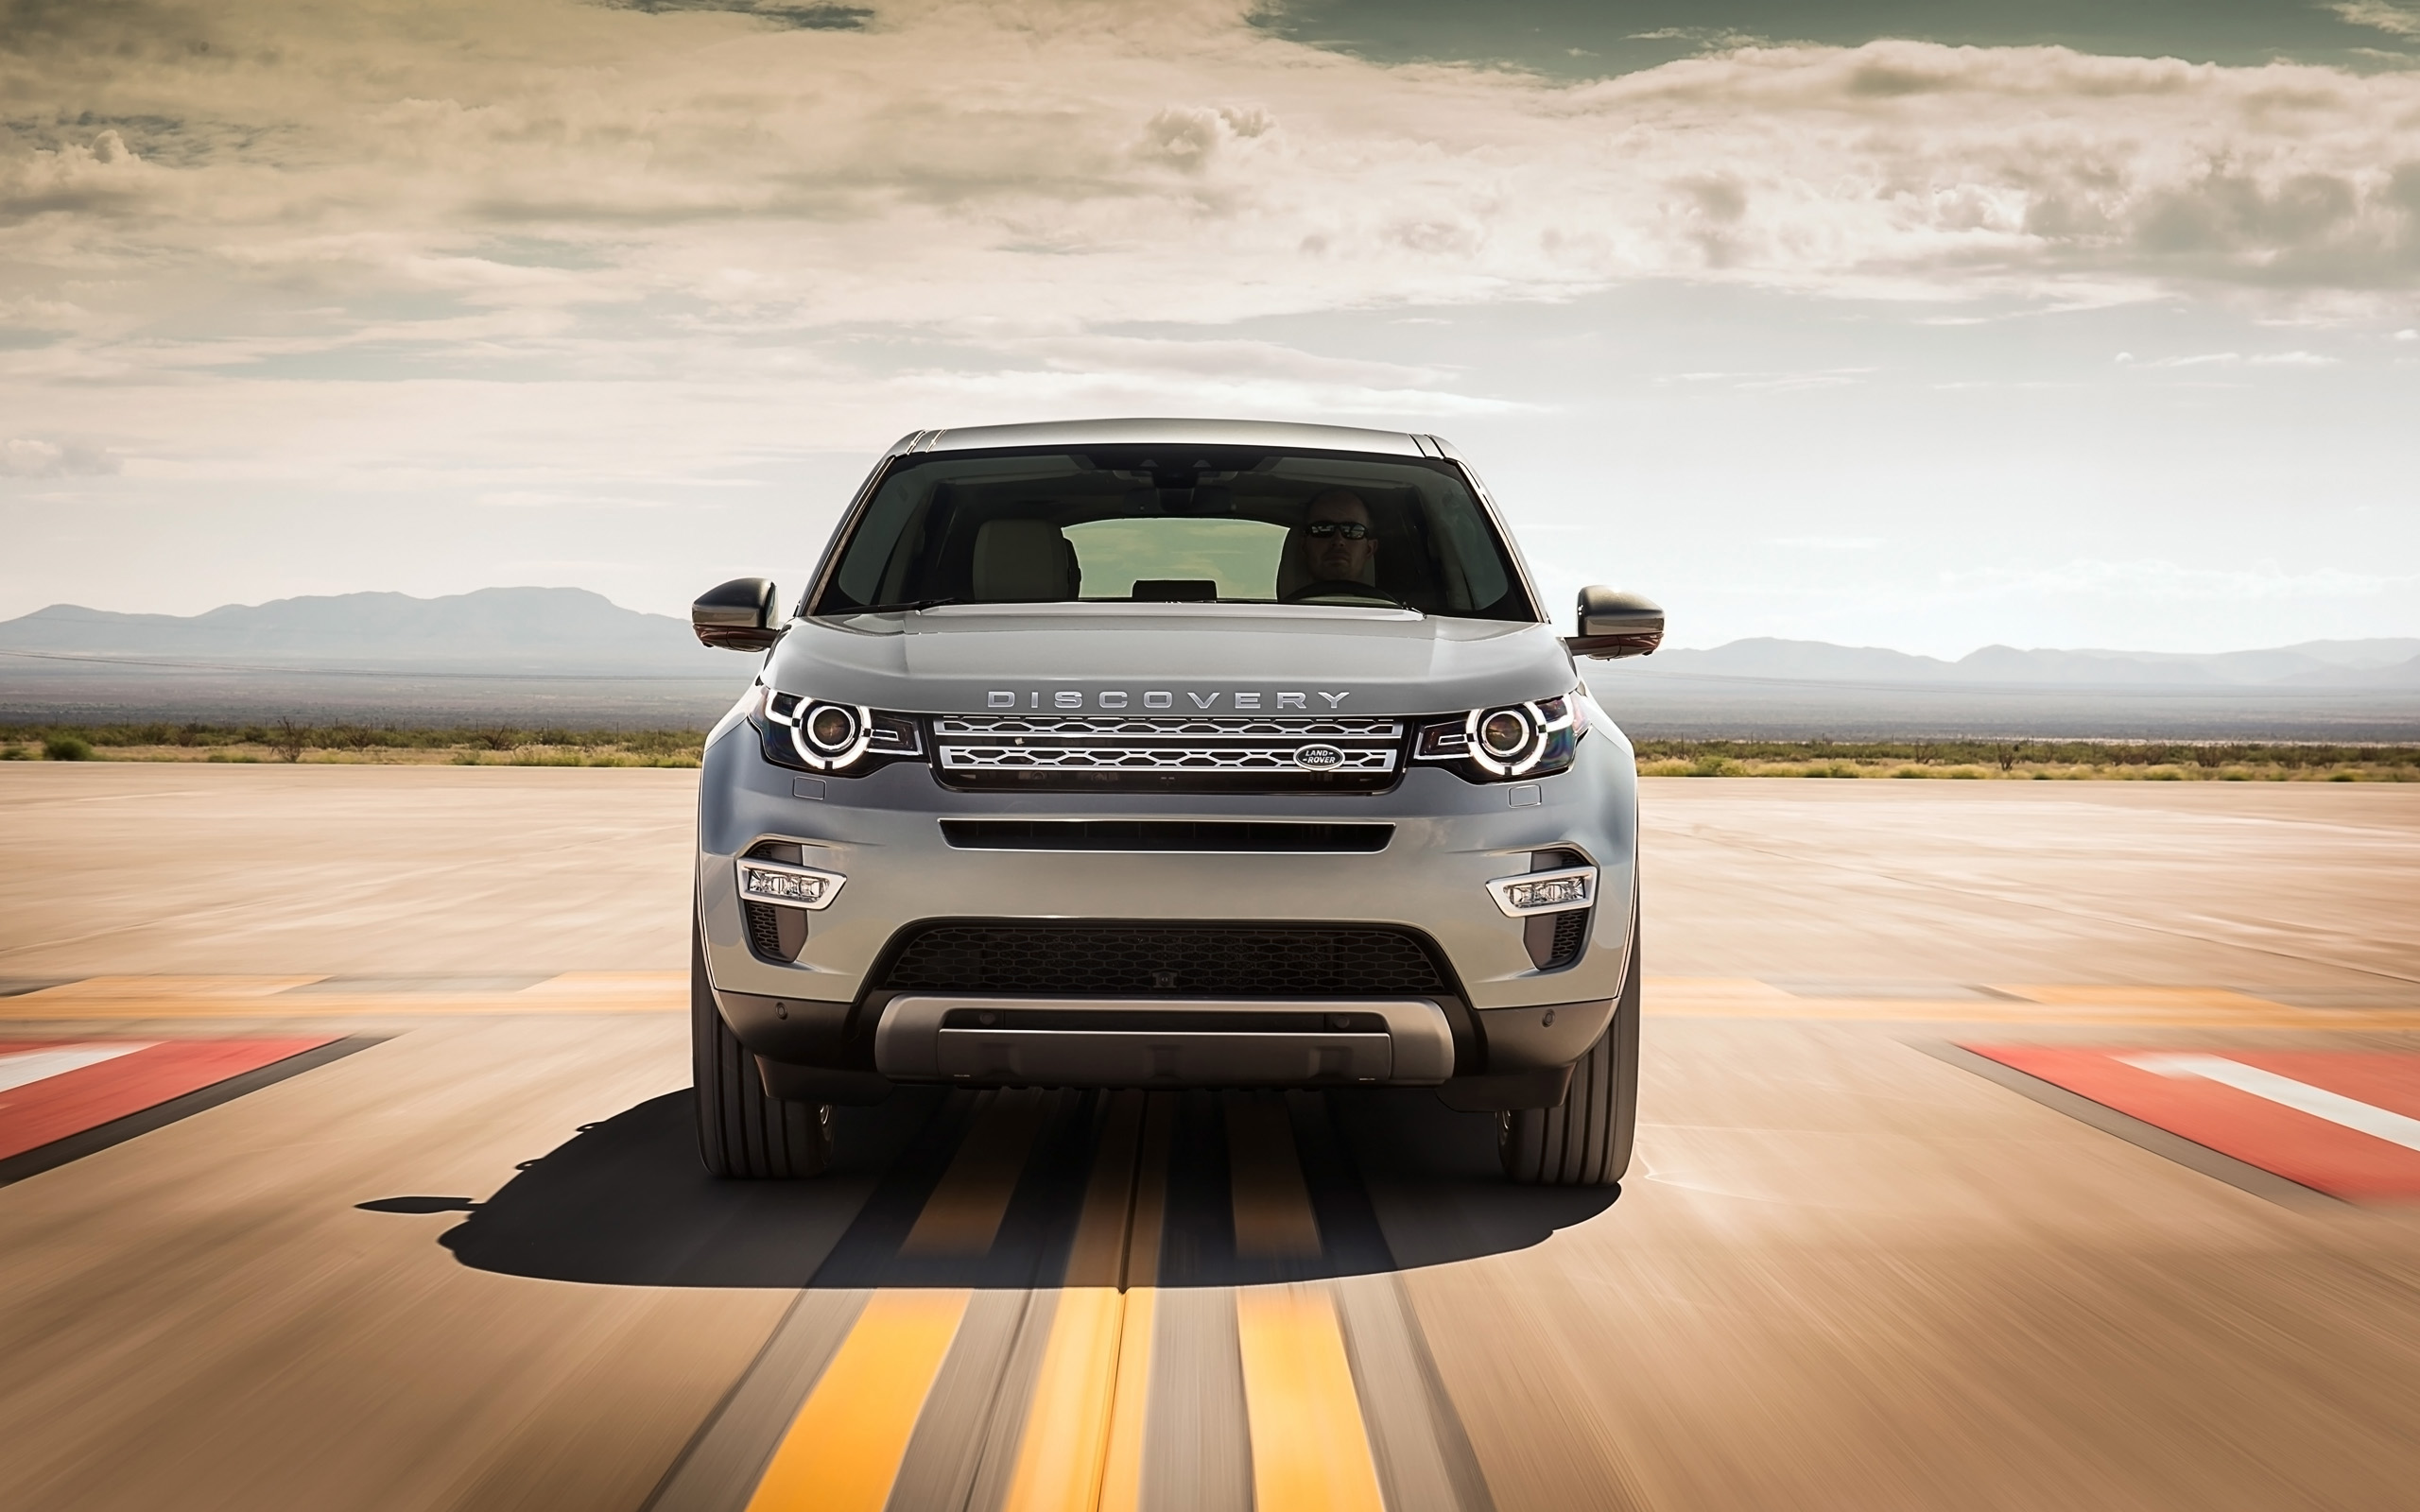 Free Download Land Rover Discovery Sport Hd Wallpapers 2560x1600 For Your Desktop Mobile Tablet Explore 27 Free Range Rover 2016 Wallpapers Free Range Rover 2016 Wallpapers 2016 Range Rover Wallpaper Range Rover Sport 2016 Wallpaper